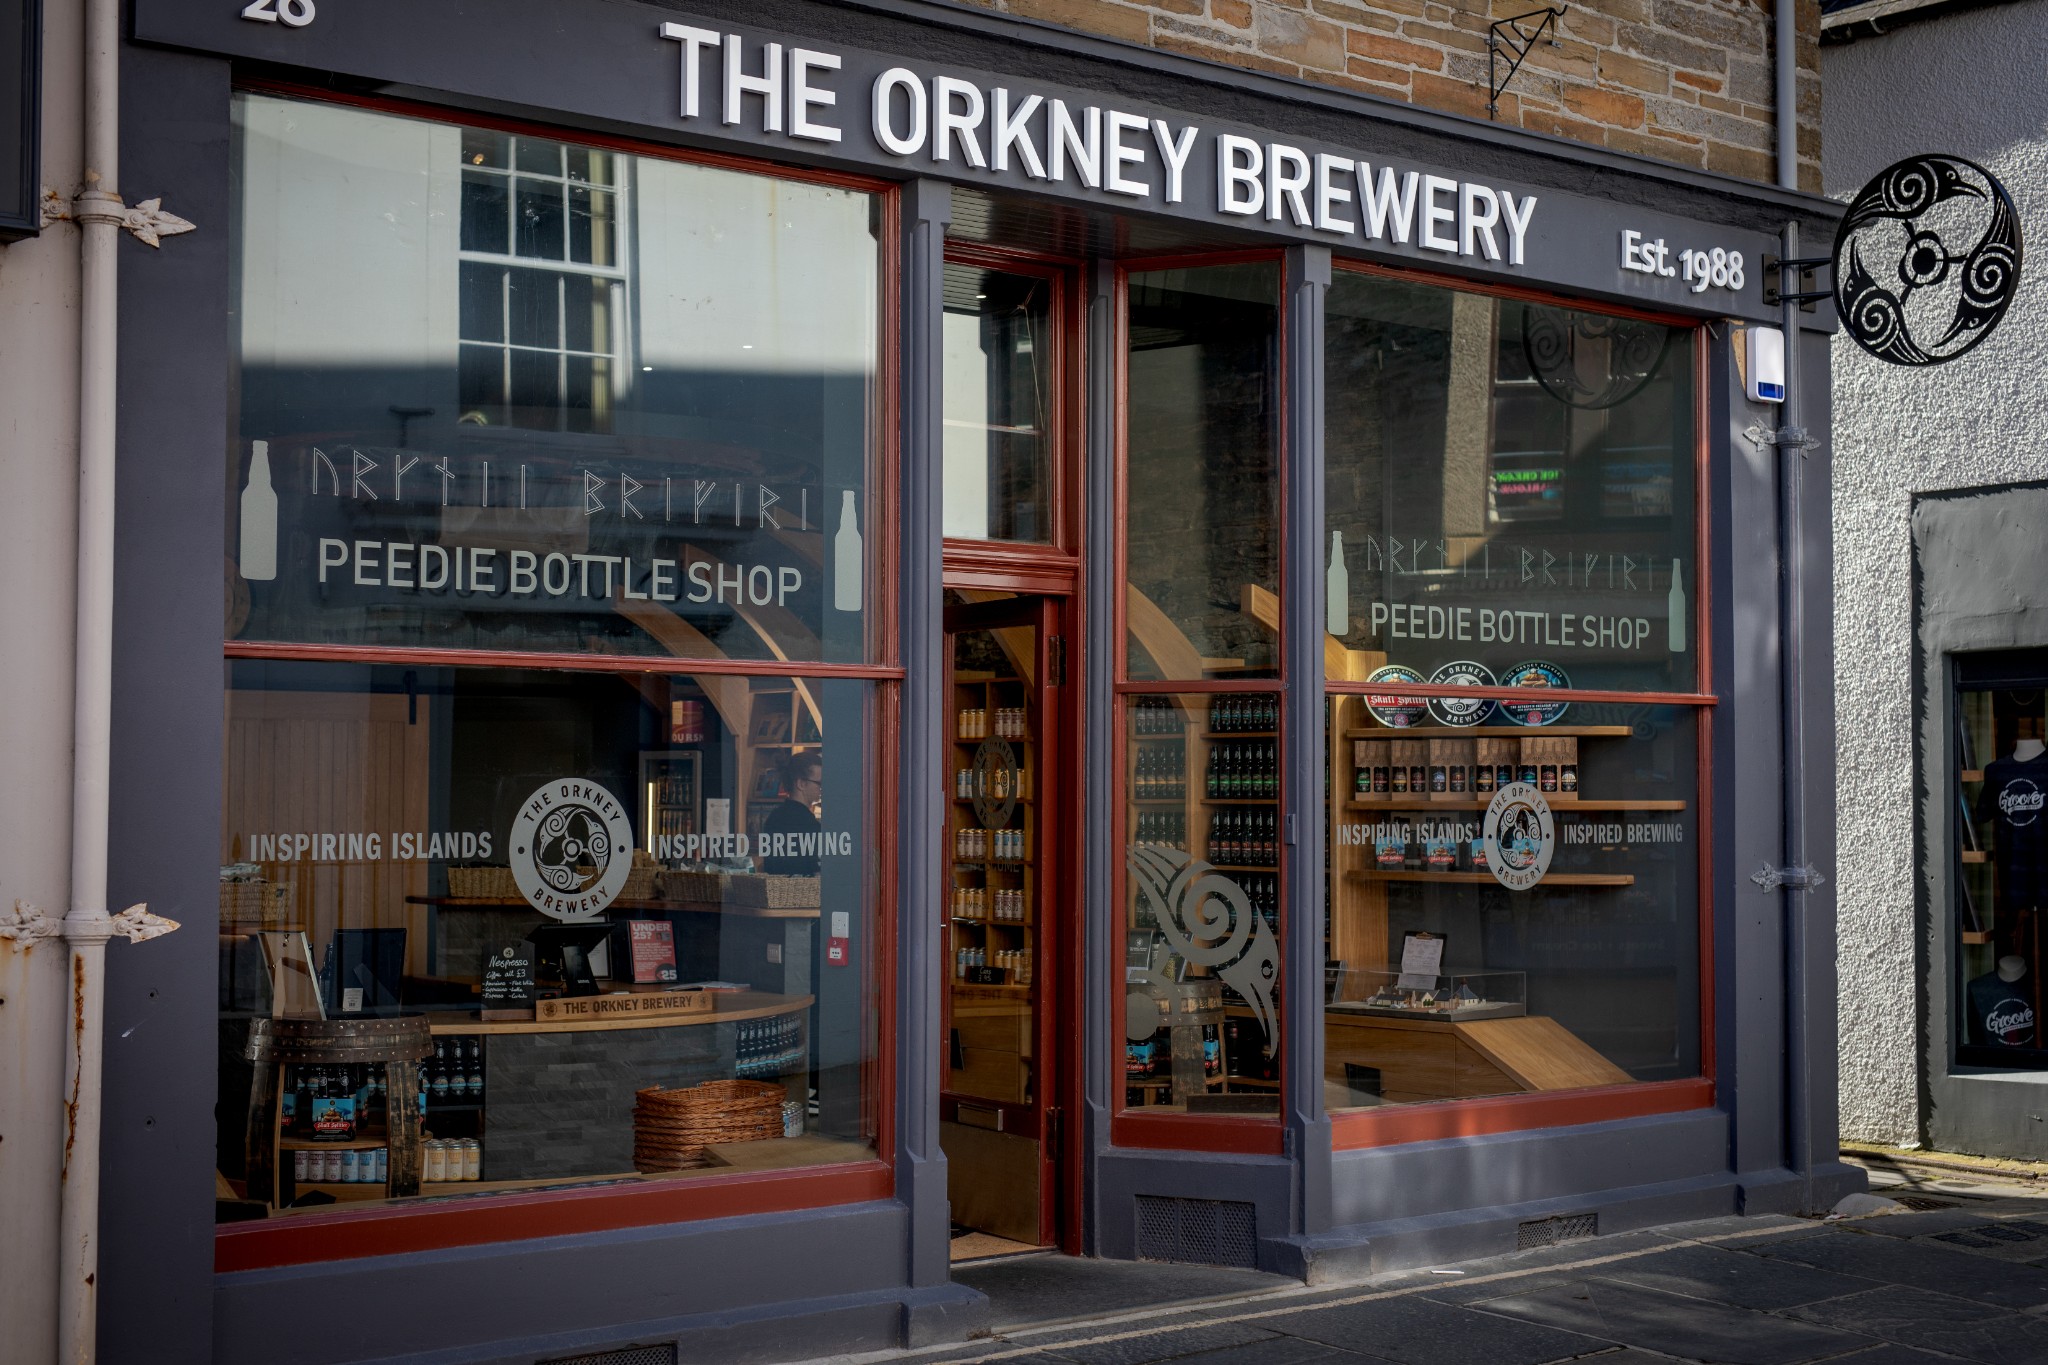 Exterior view of the new Orkney Brewery Peedie Bottle Shop